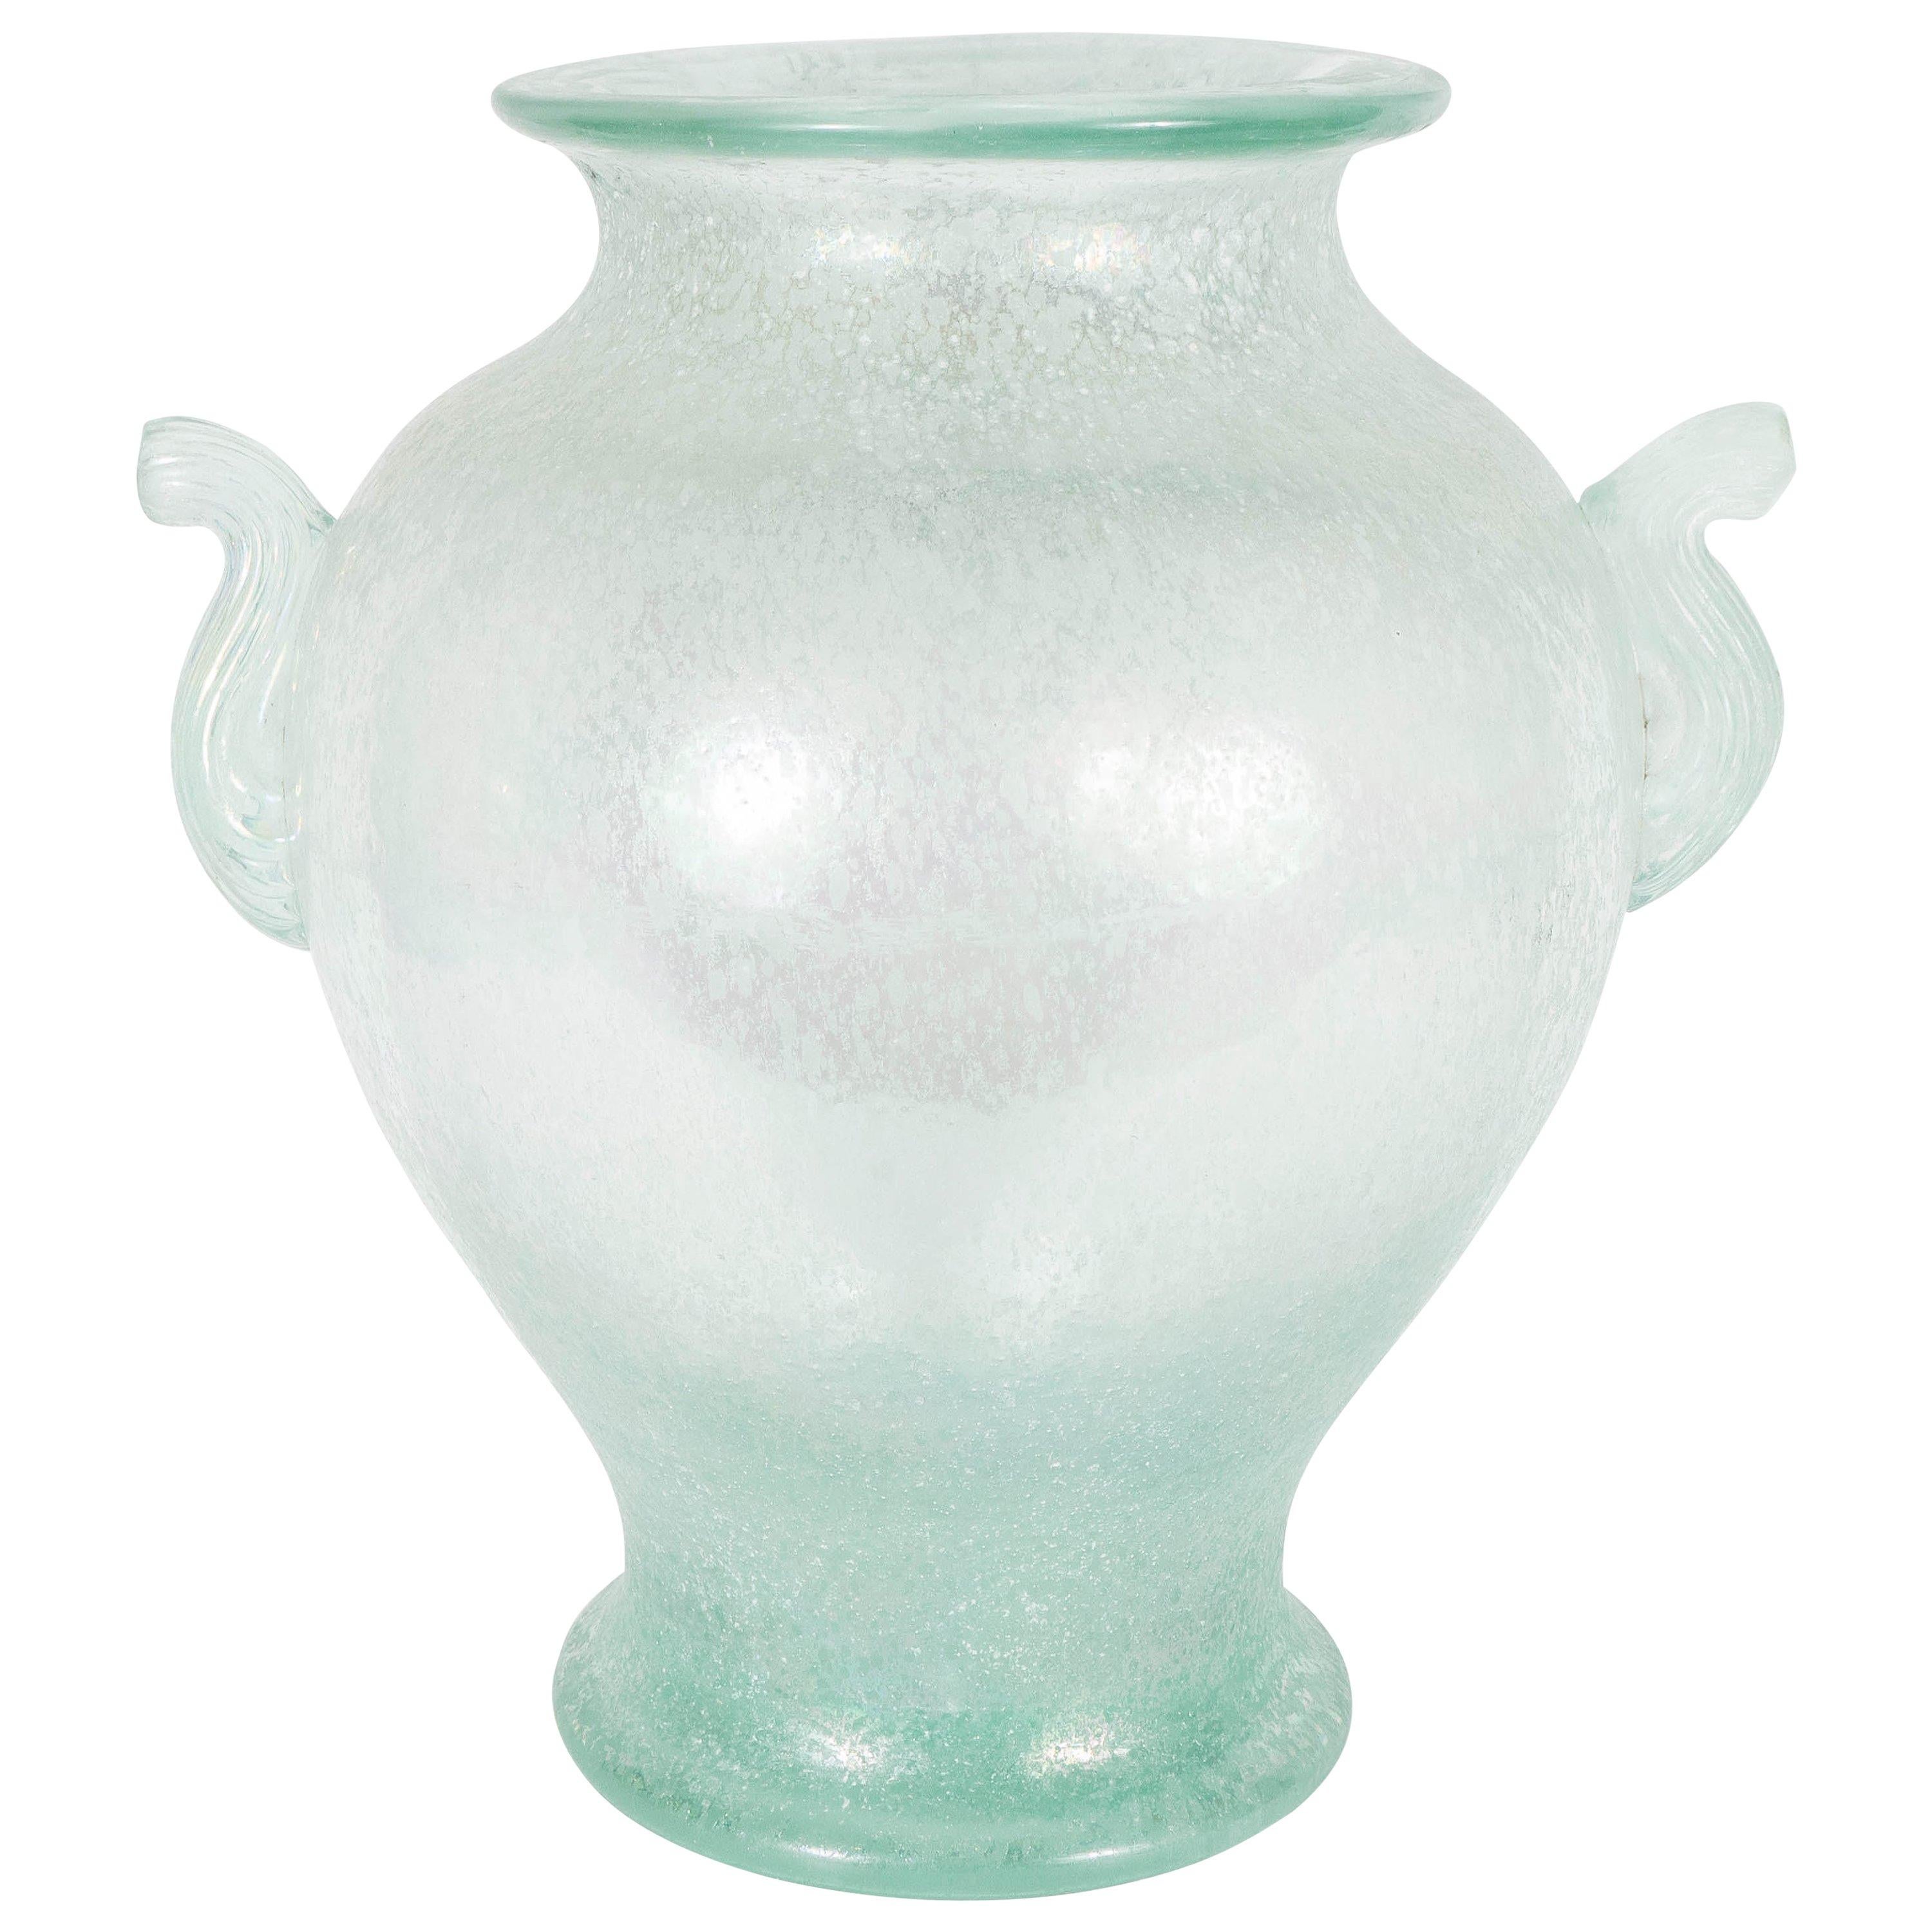 Handblown Murano Glass Vase With Scrolled Arms in the Manner of Karl Springer